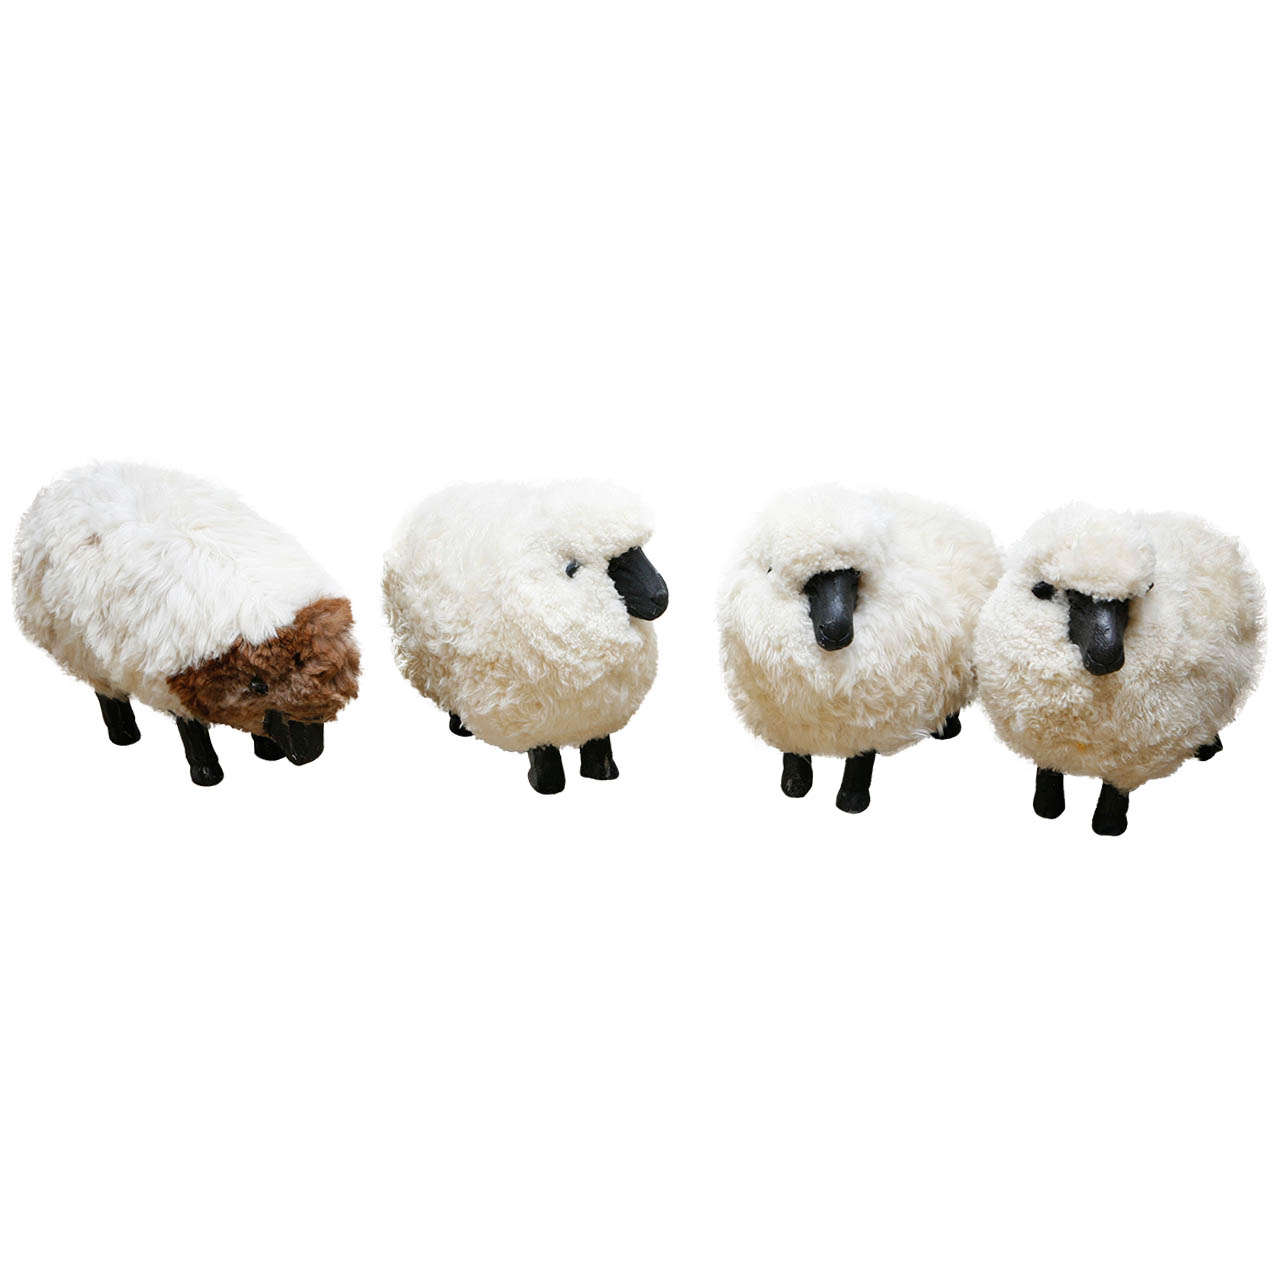 Vintage Sheep in the Style of Lalanne